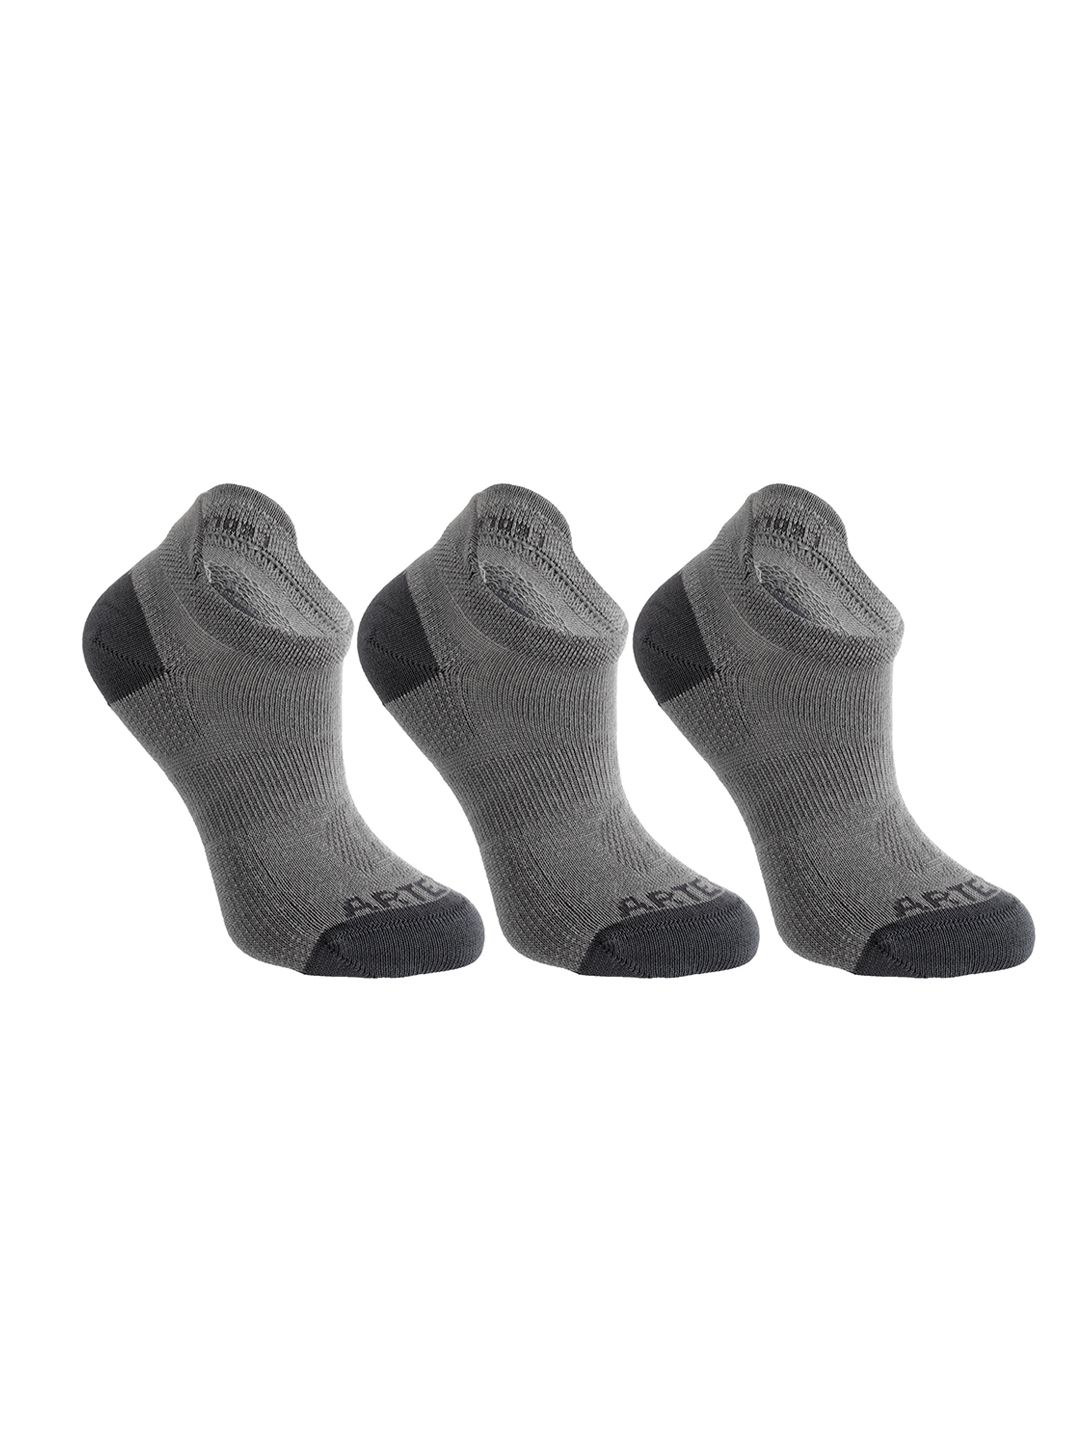 Domyos By Decathlon Set of 3 Grey Solid Ankle-Length Yoga Socks Price in India